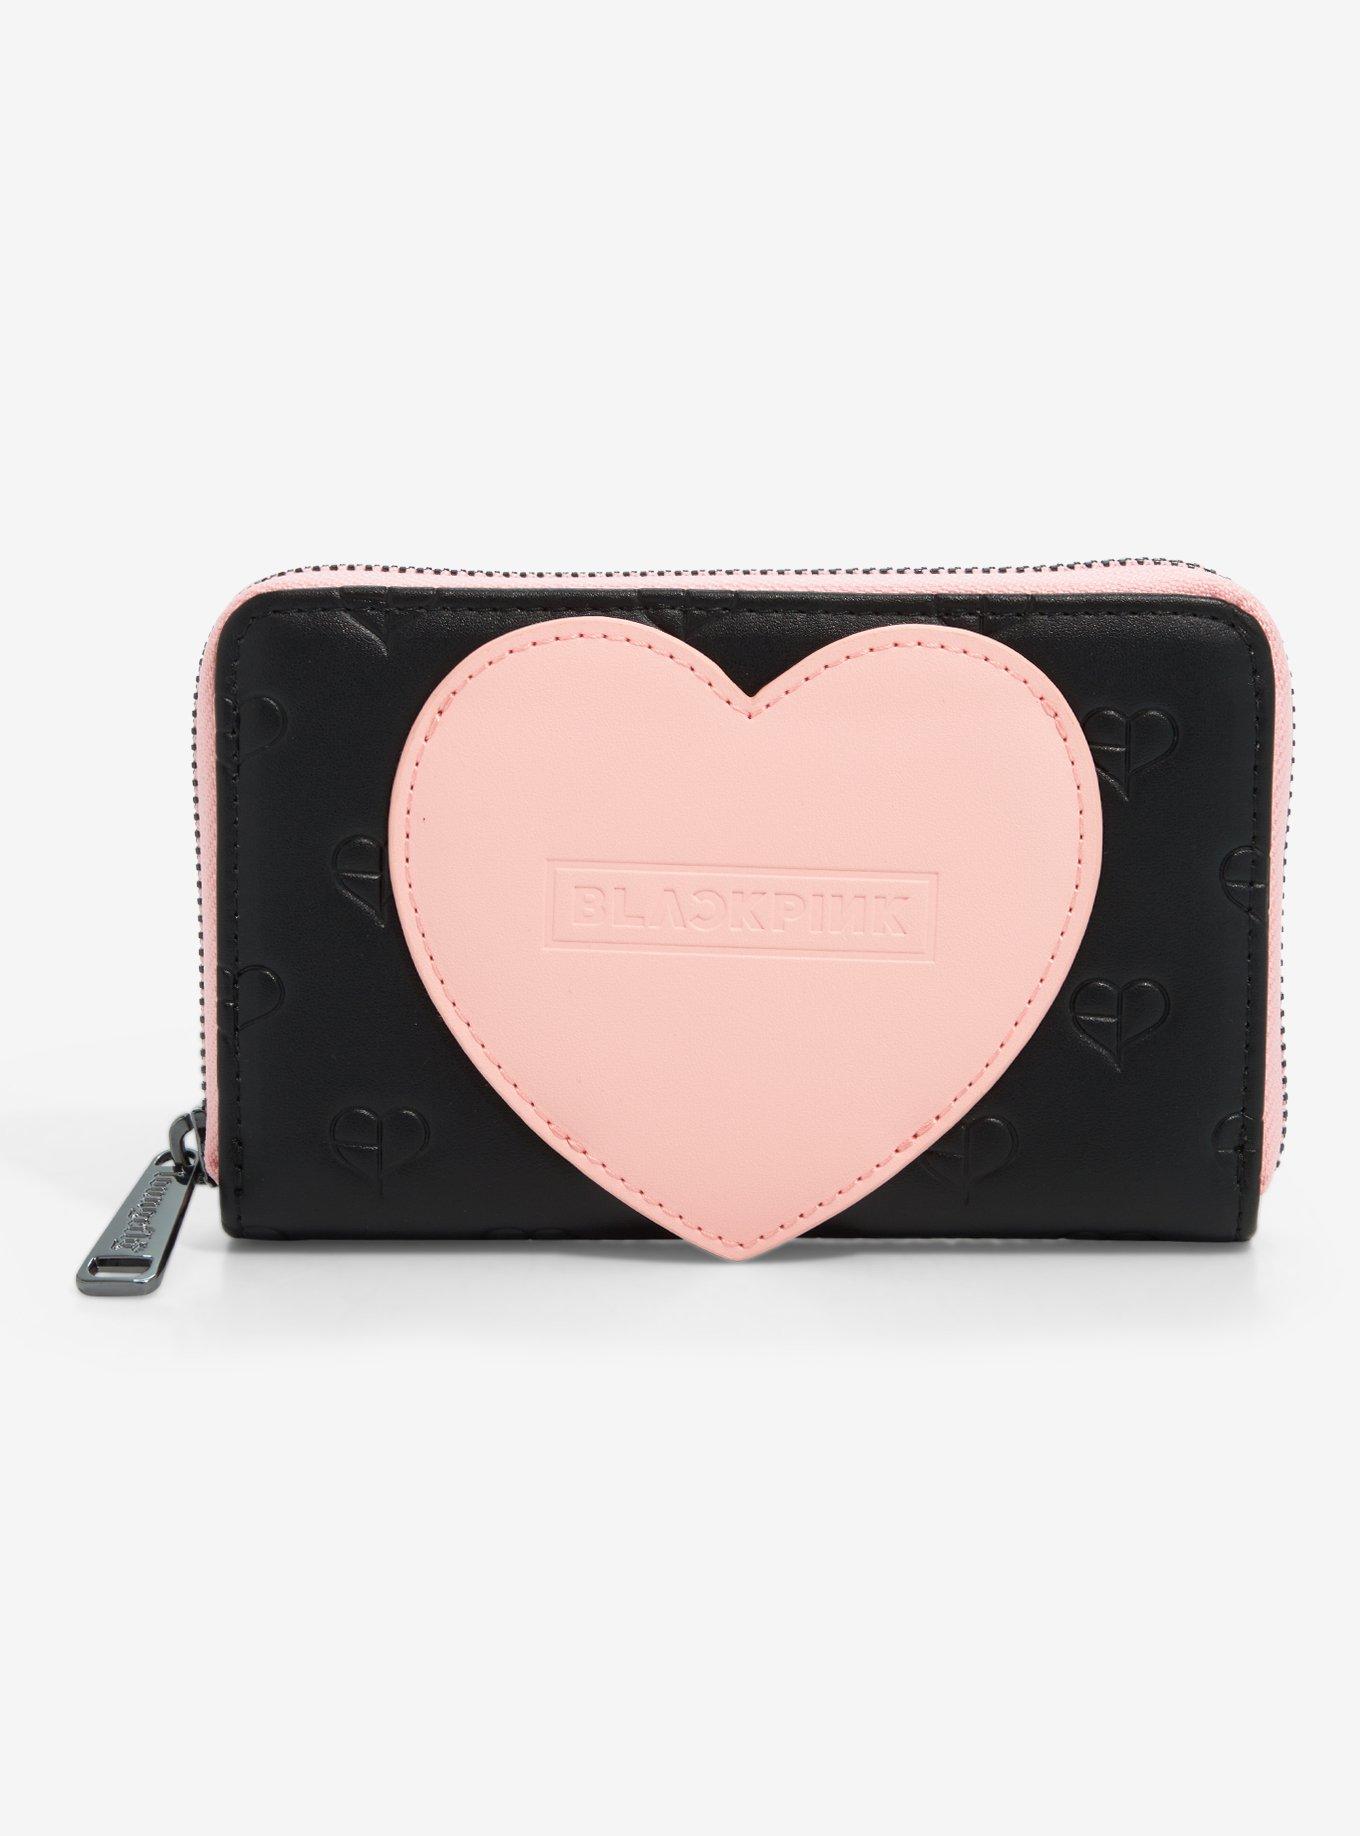  Loungefly Funko Pop! Wallet: BTS Band with Hearts, All